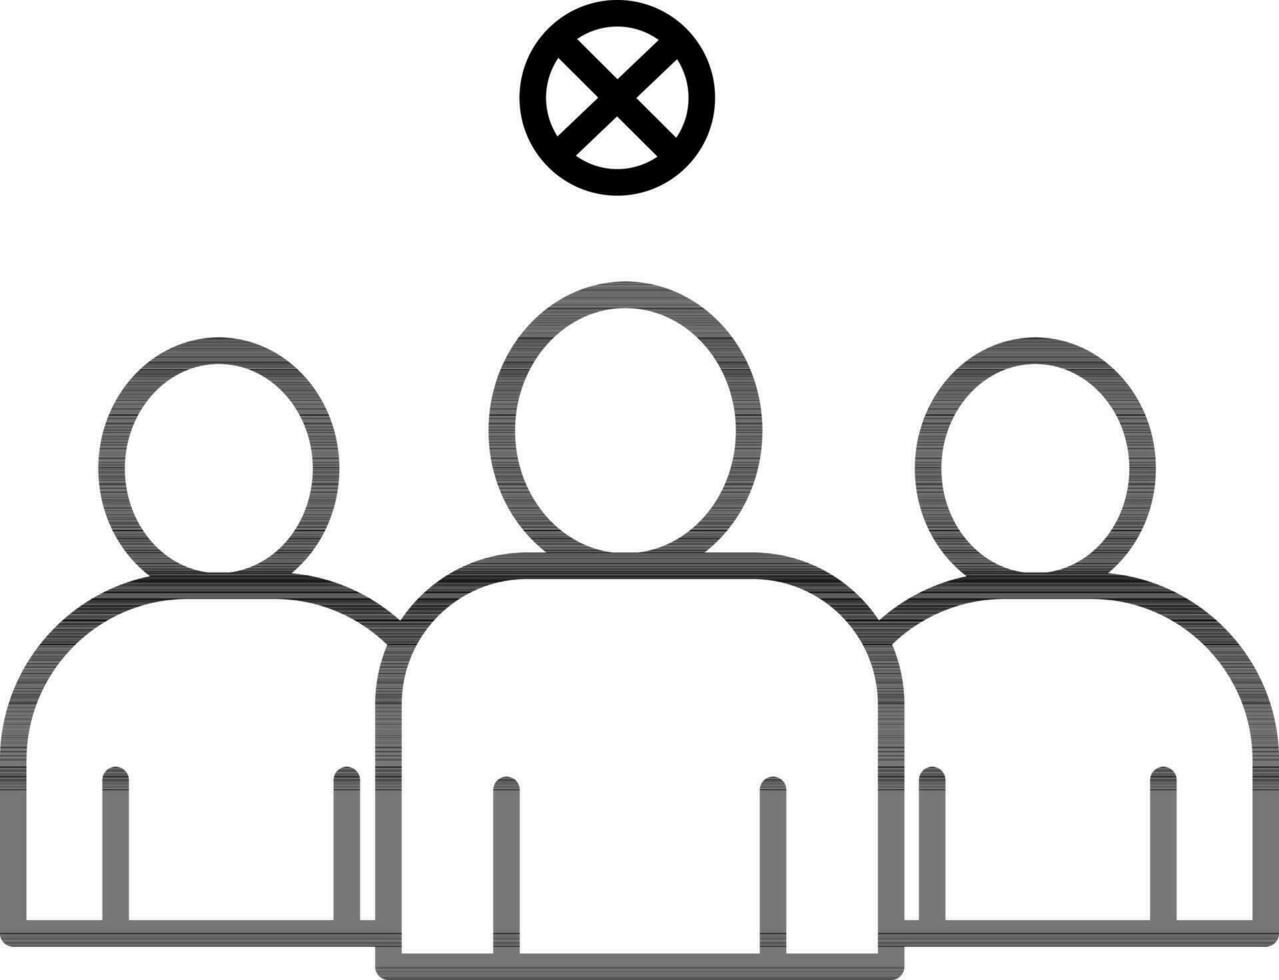 No Crowd or Keep Space Maintain People icon in Line Art. vector